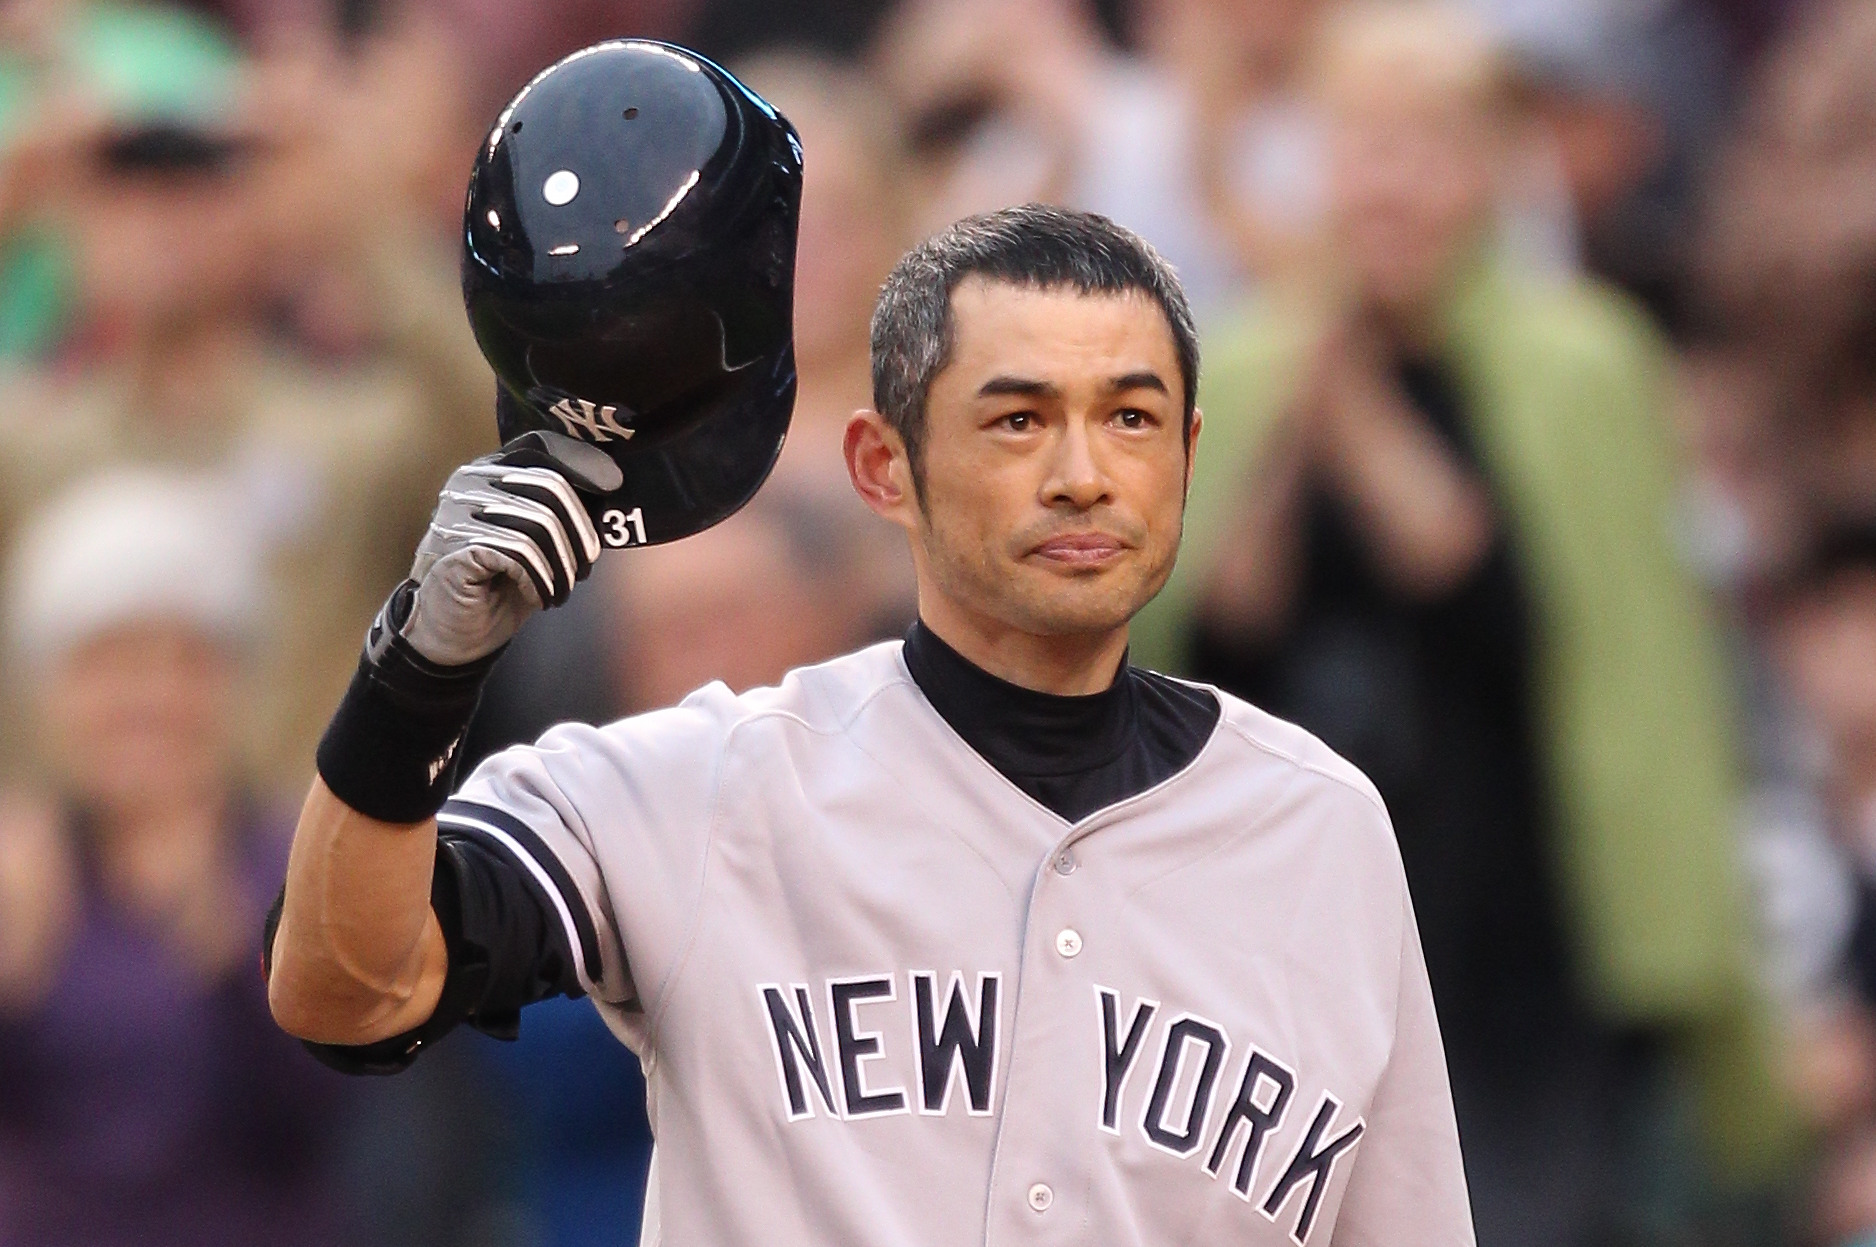 How Many Hits Would Ichiro Have Had If His Entire Career Were in MLB?, News, Scores, Highlights, Stats, and Rumors